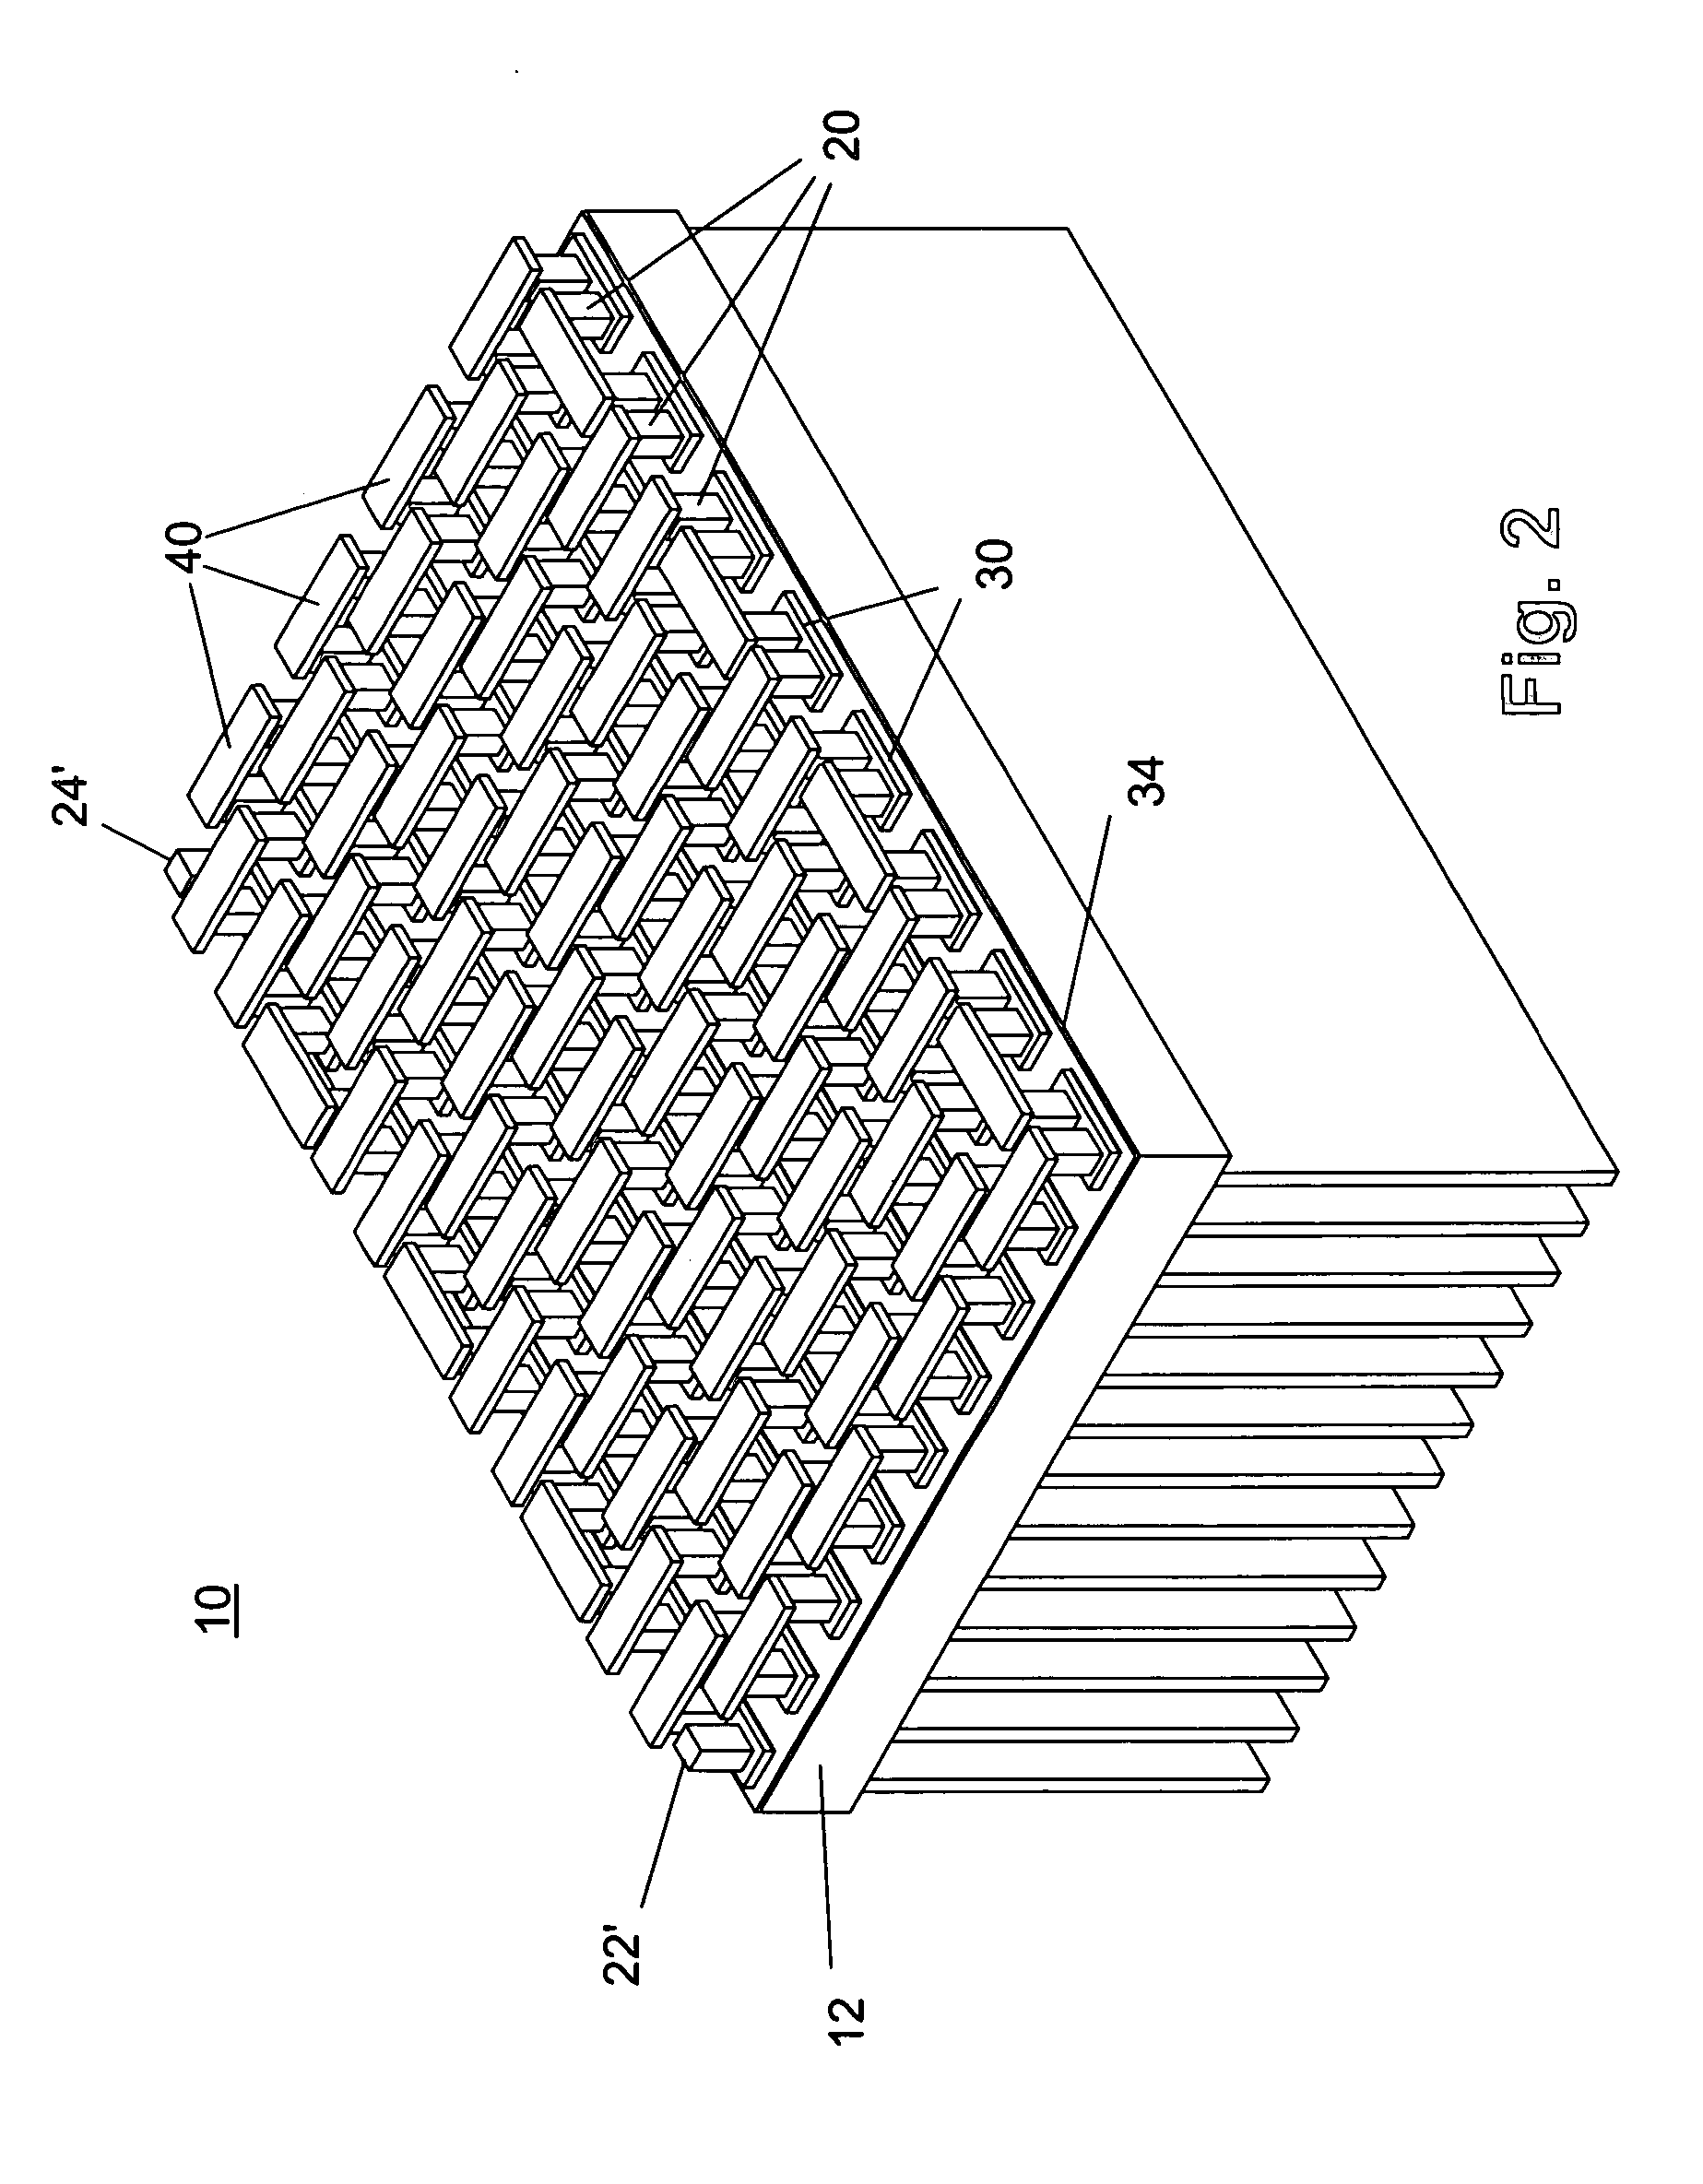 Thermoelectric module with directly bonded heat exchanger